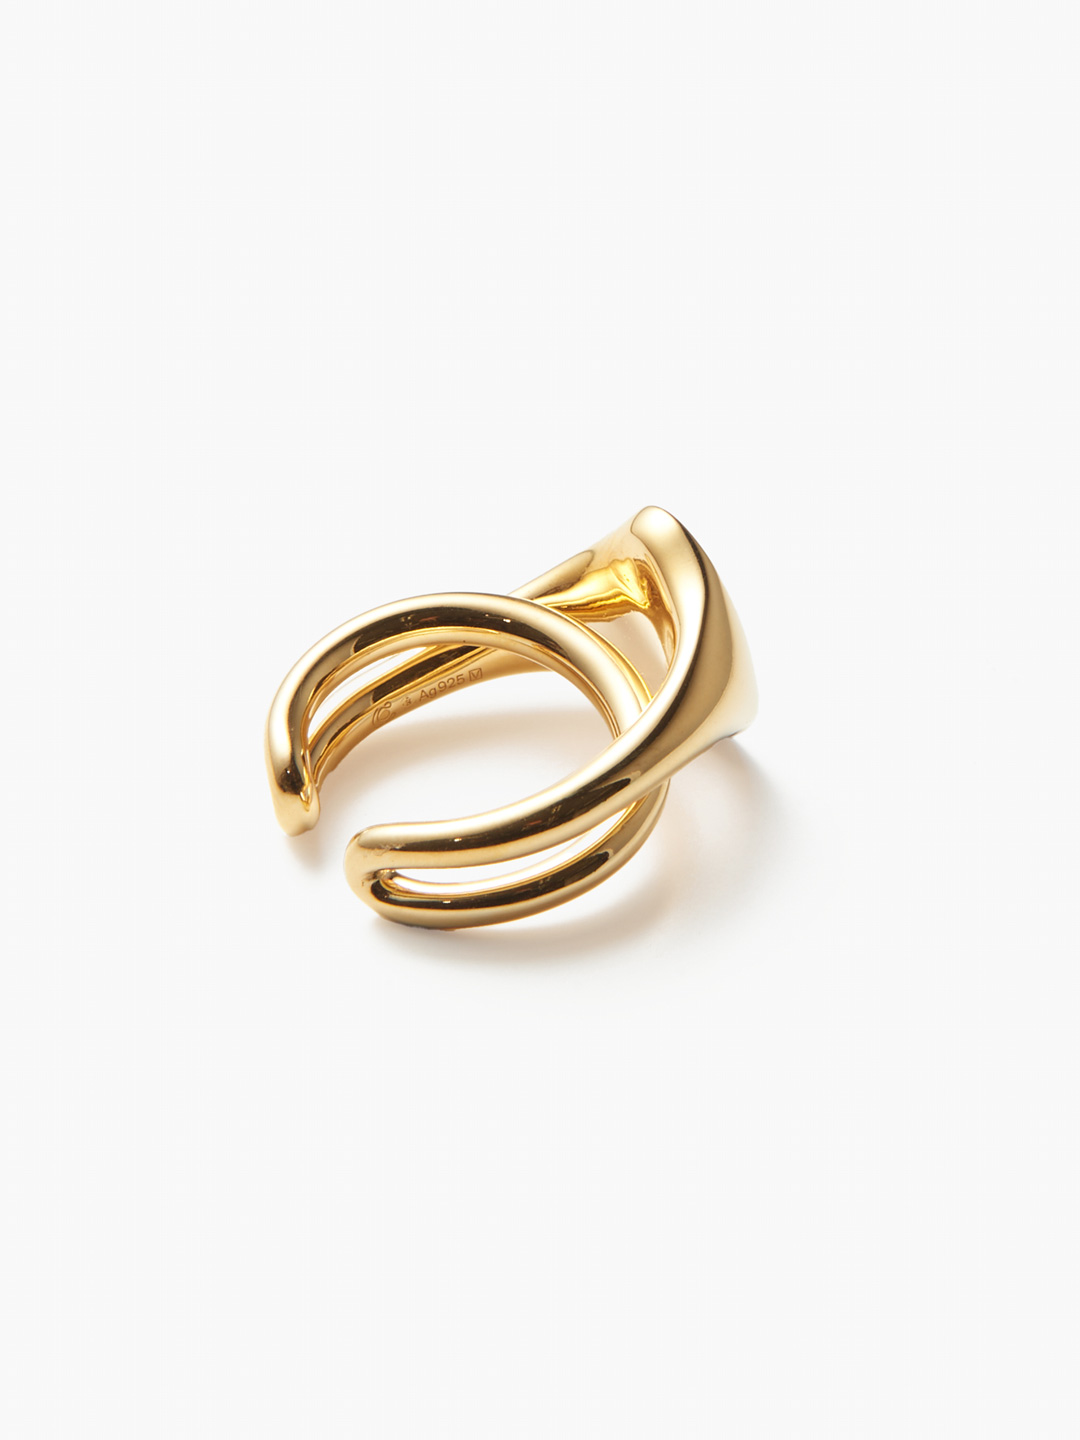 Chevaliere Initial Ring  - Yellow Gold